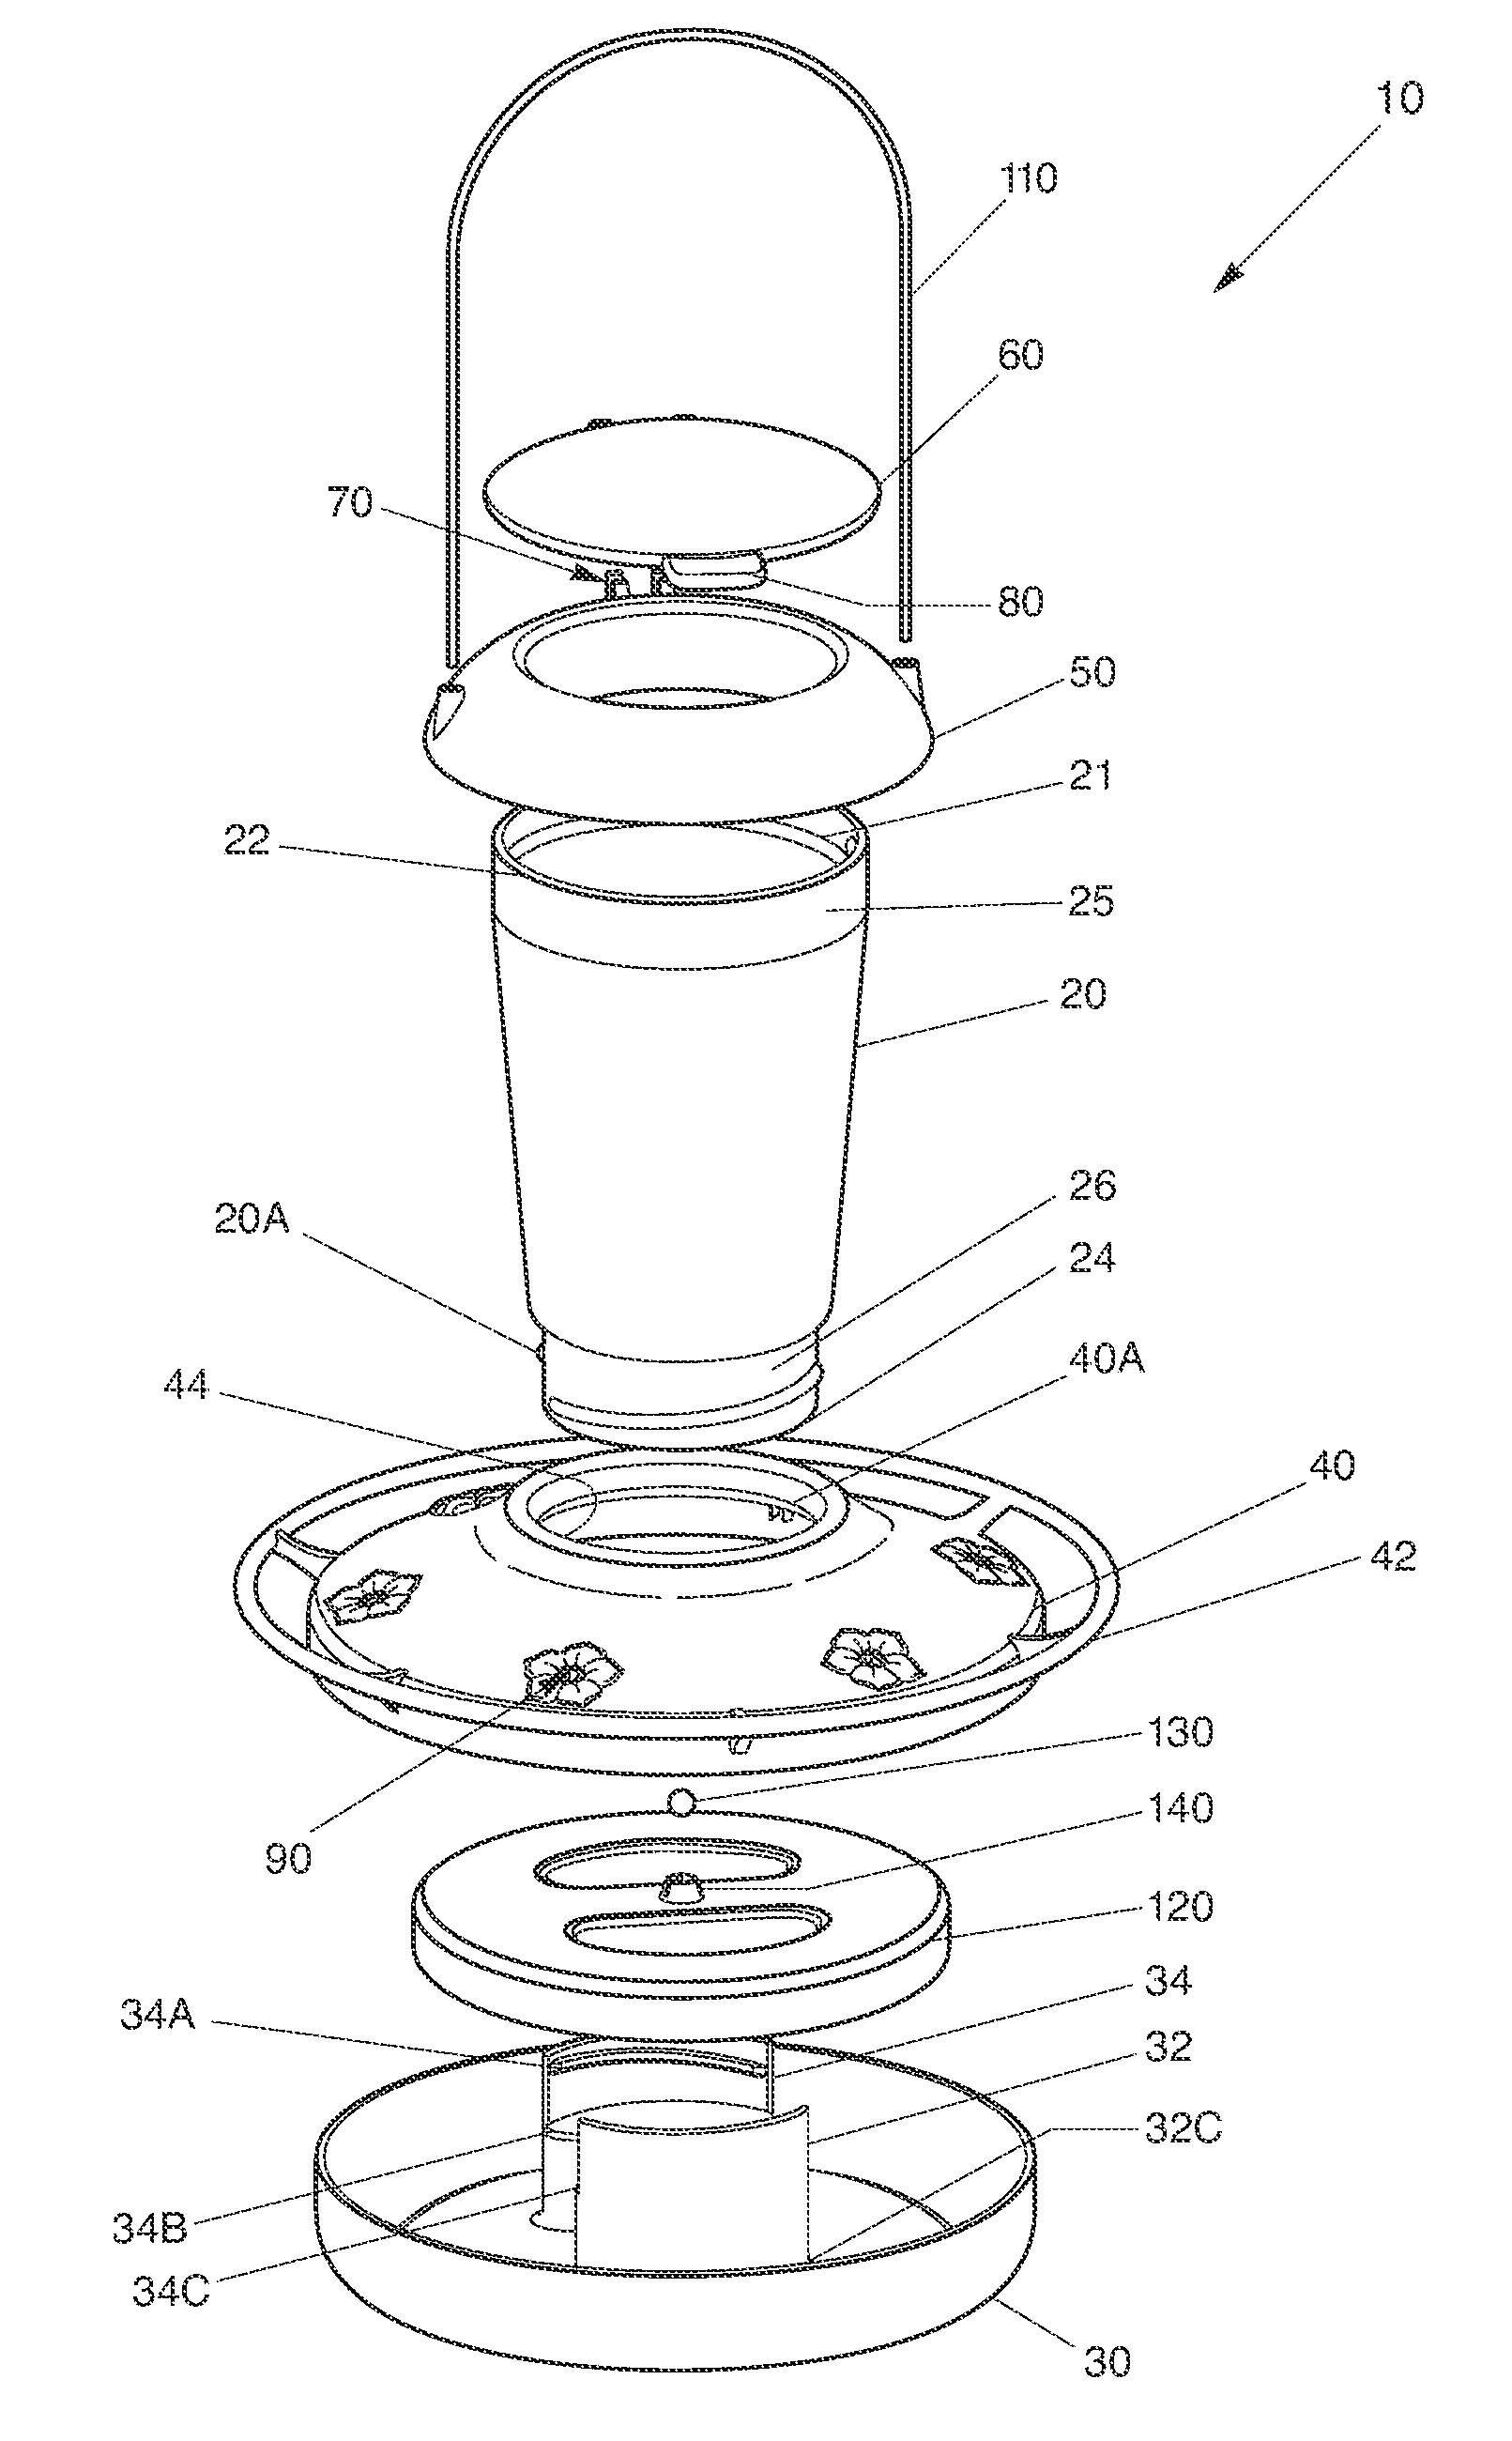 Nectar feeder with float and valve